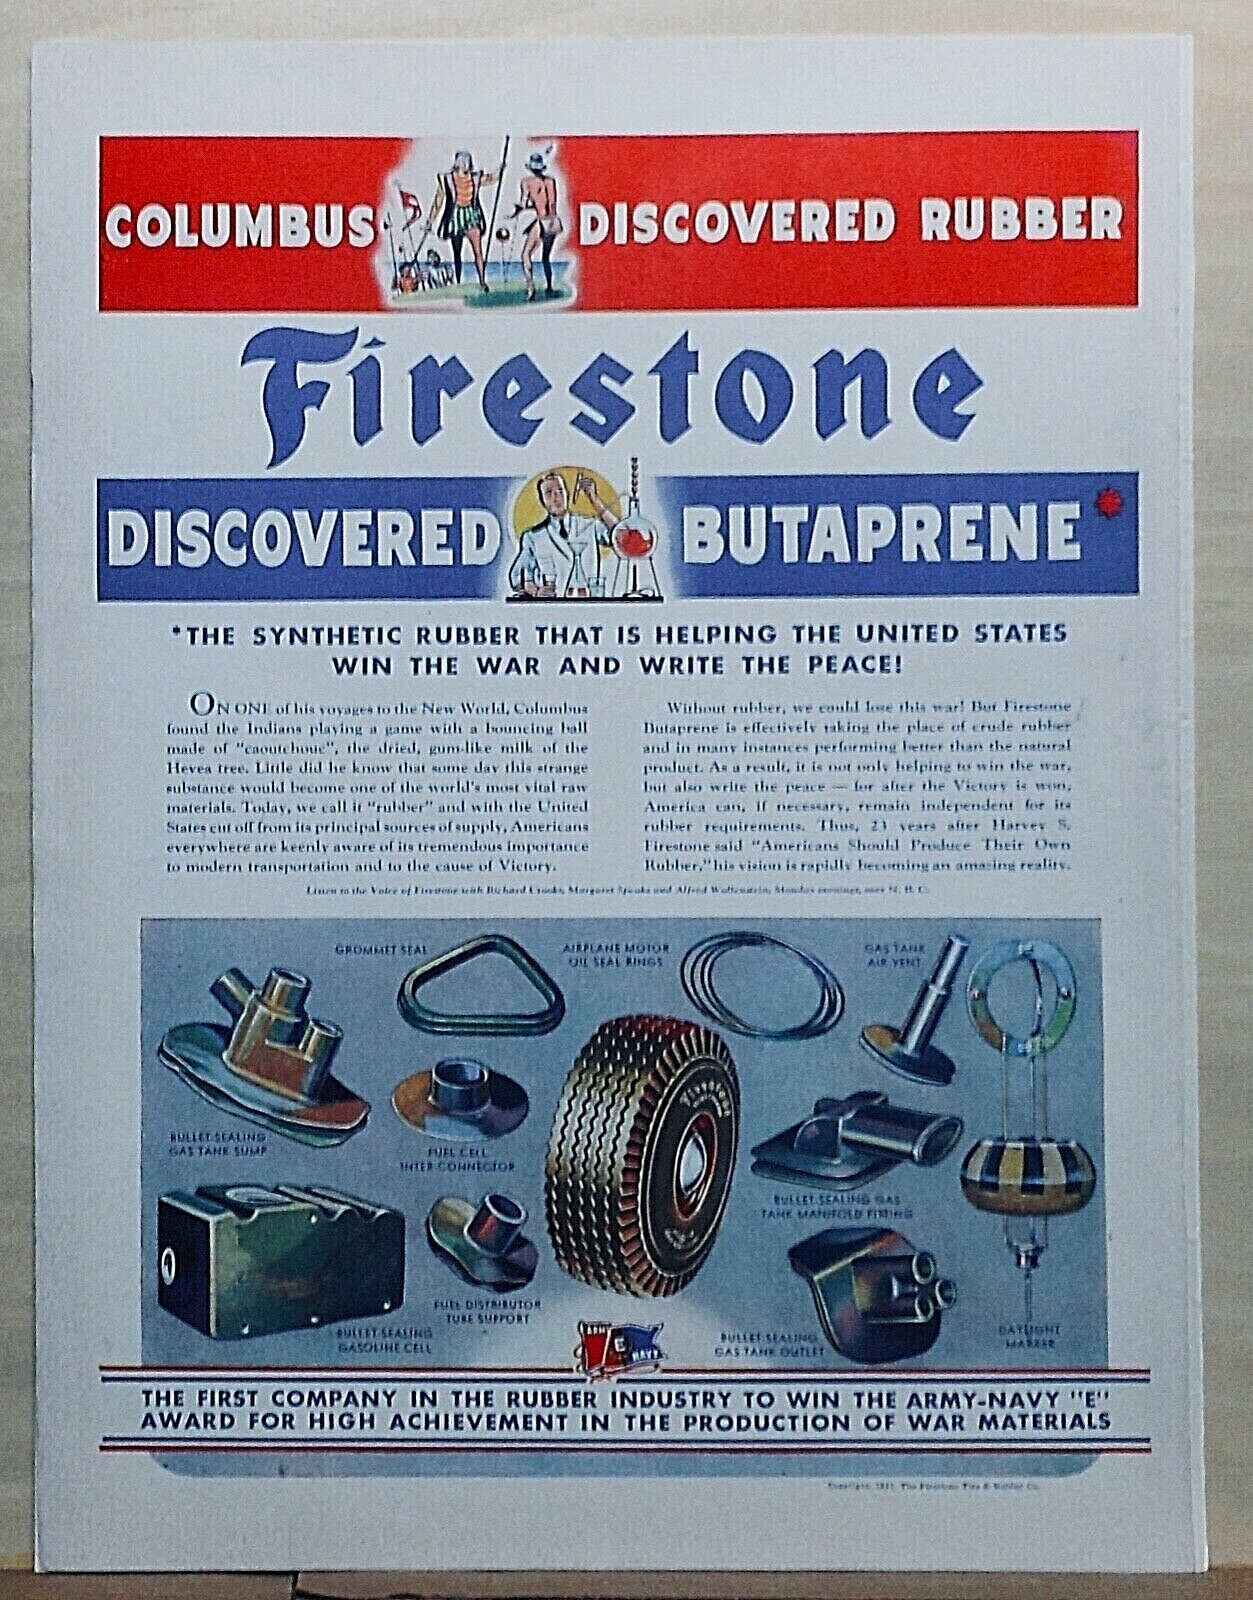 1943 magazine ad for Firestone Tires - Butaprene discovery synthetic rubber WW2